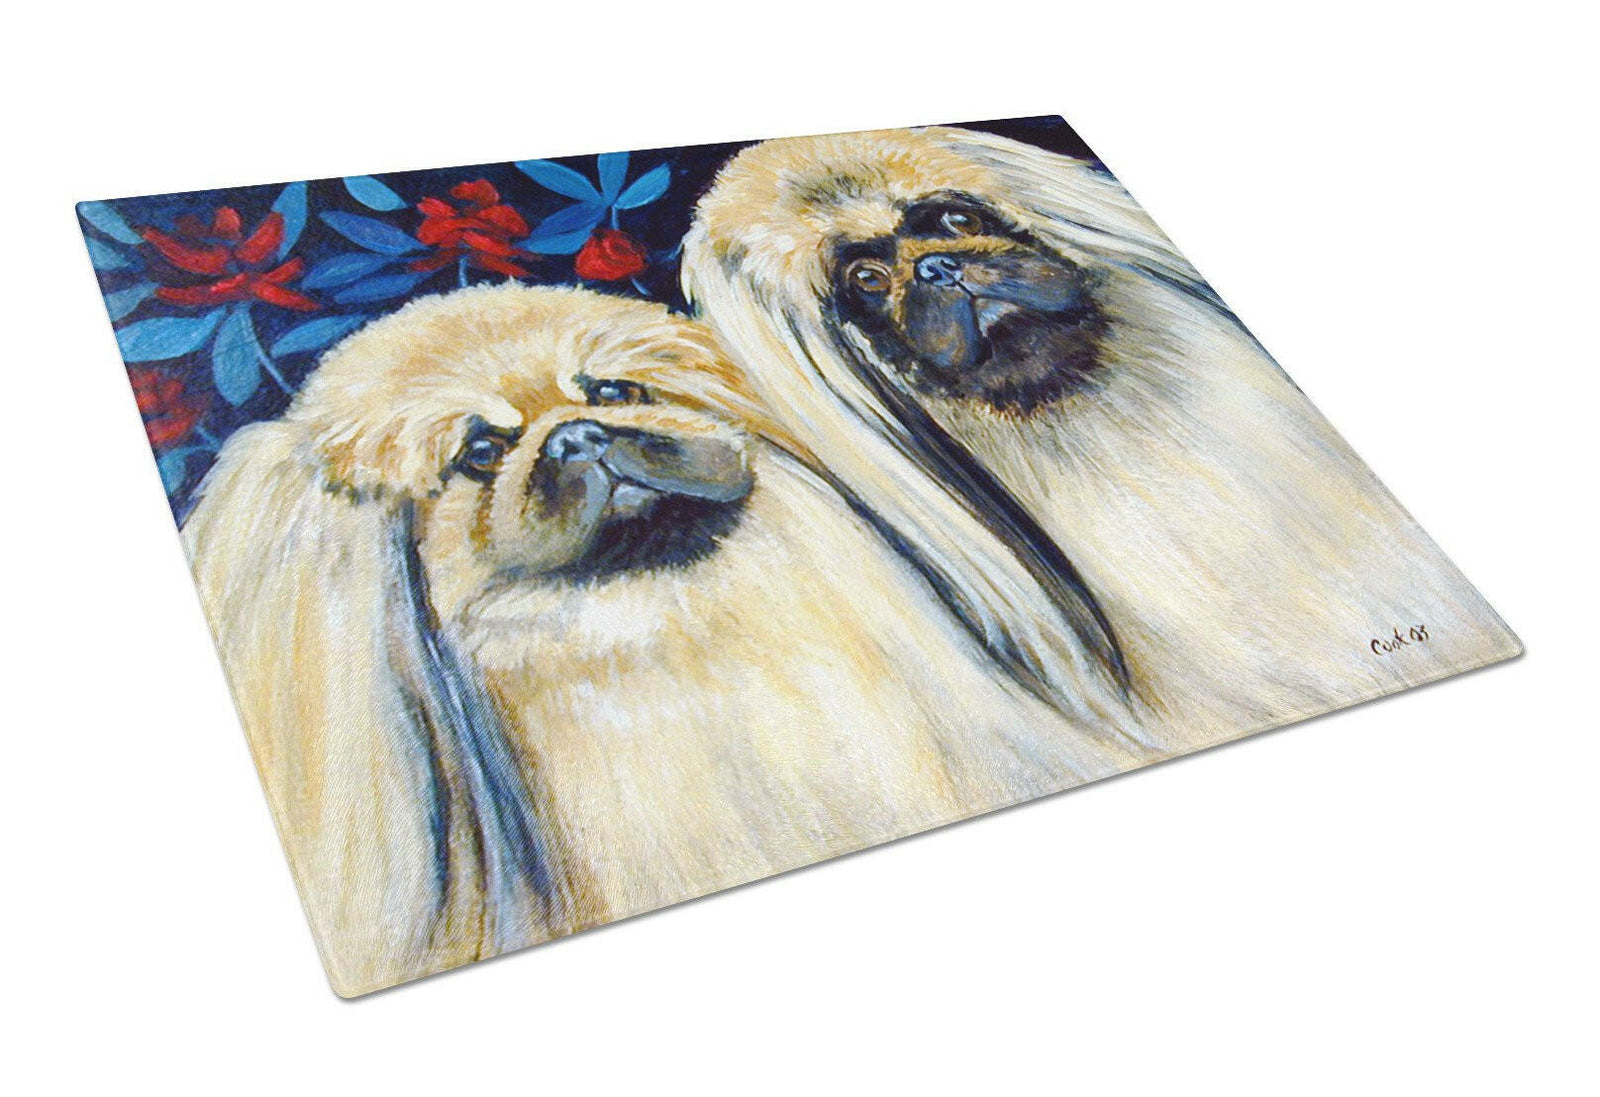 Two Pekingese on a Glass Cutting Board Large by Caroline's Treasures